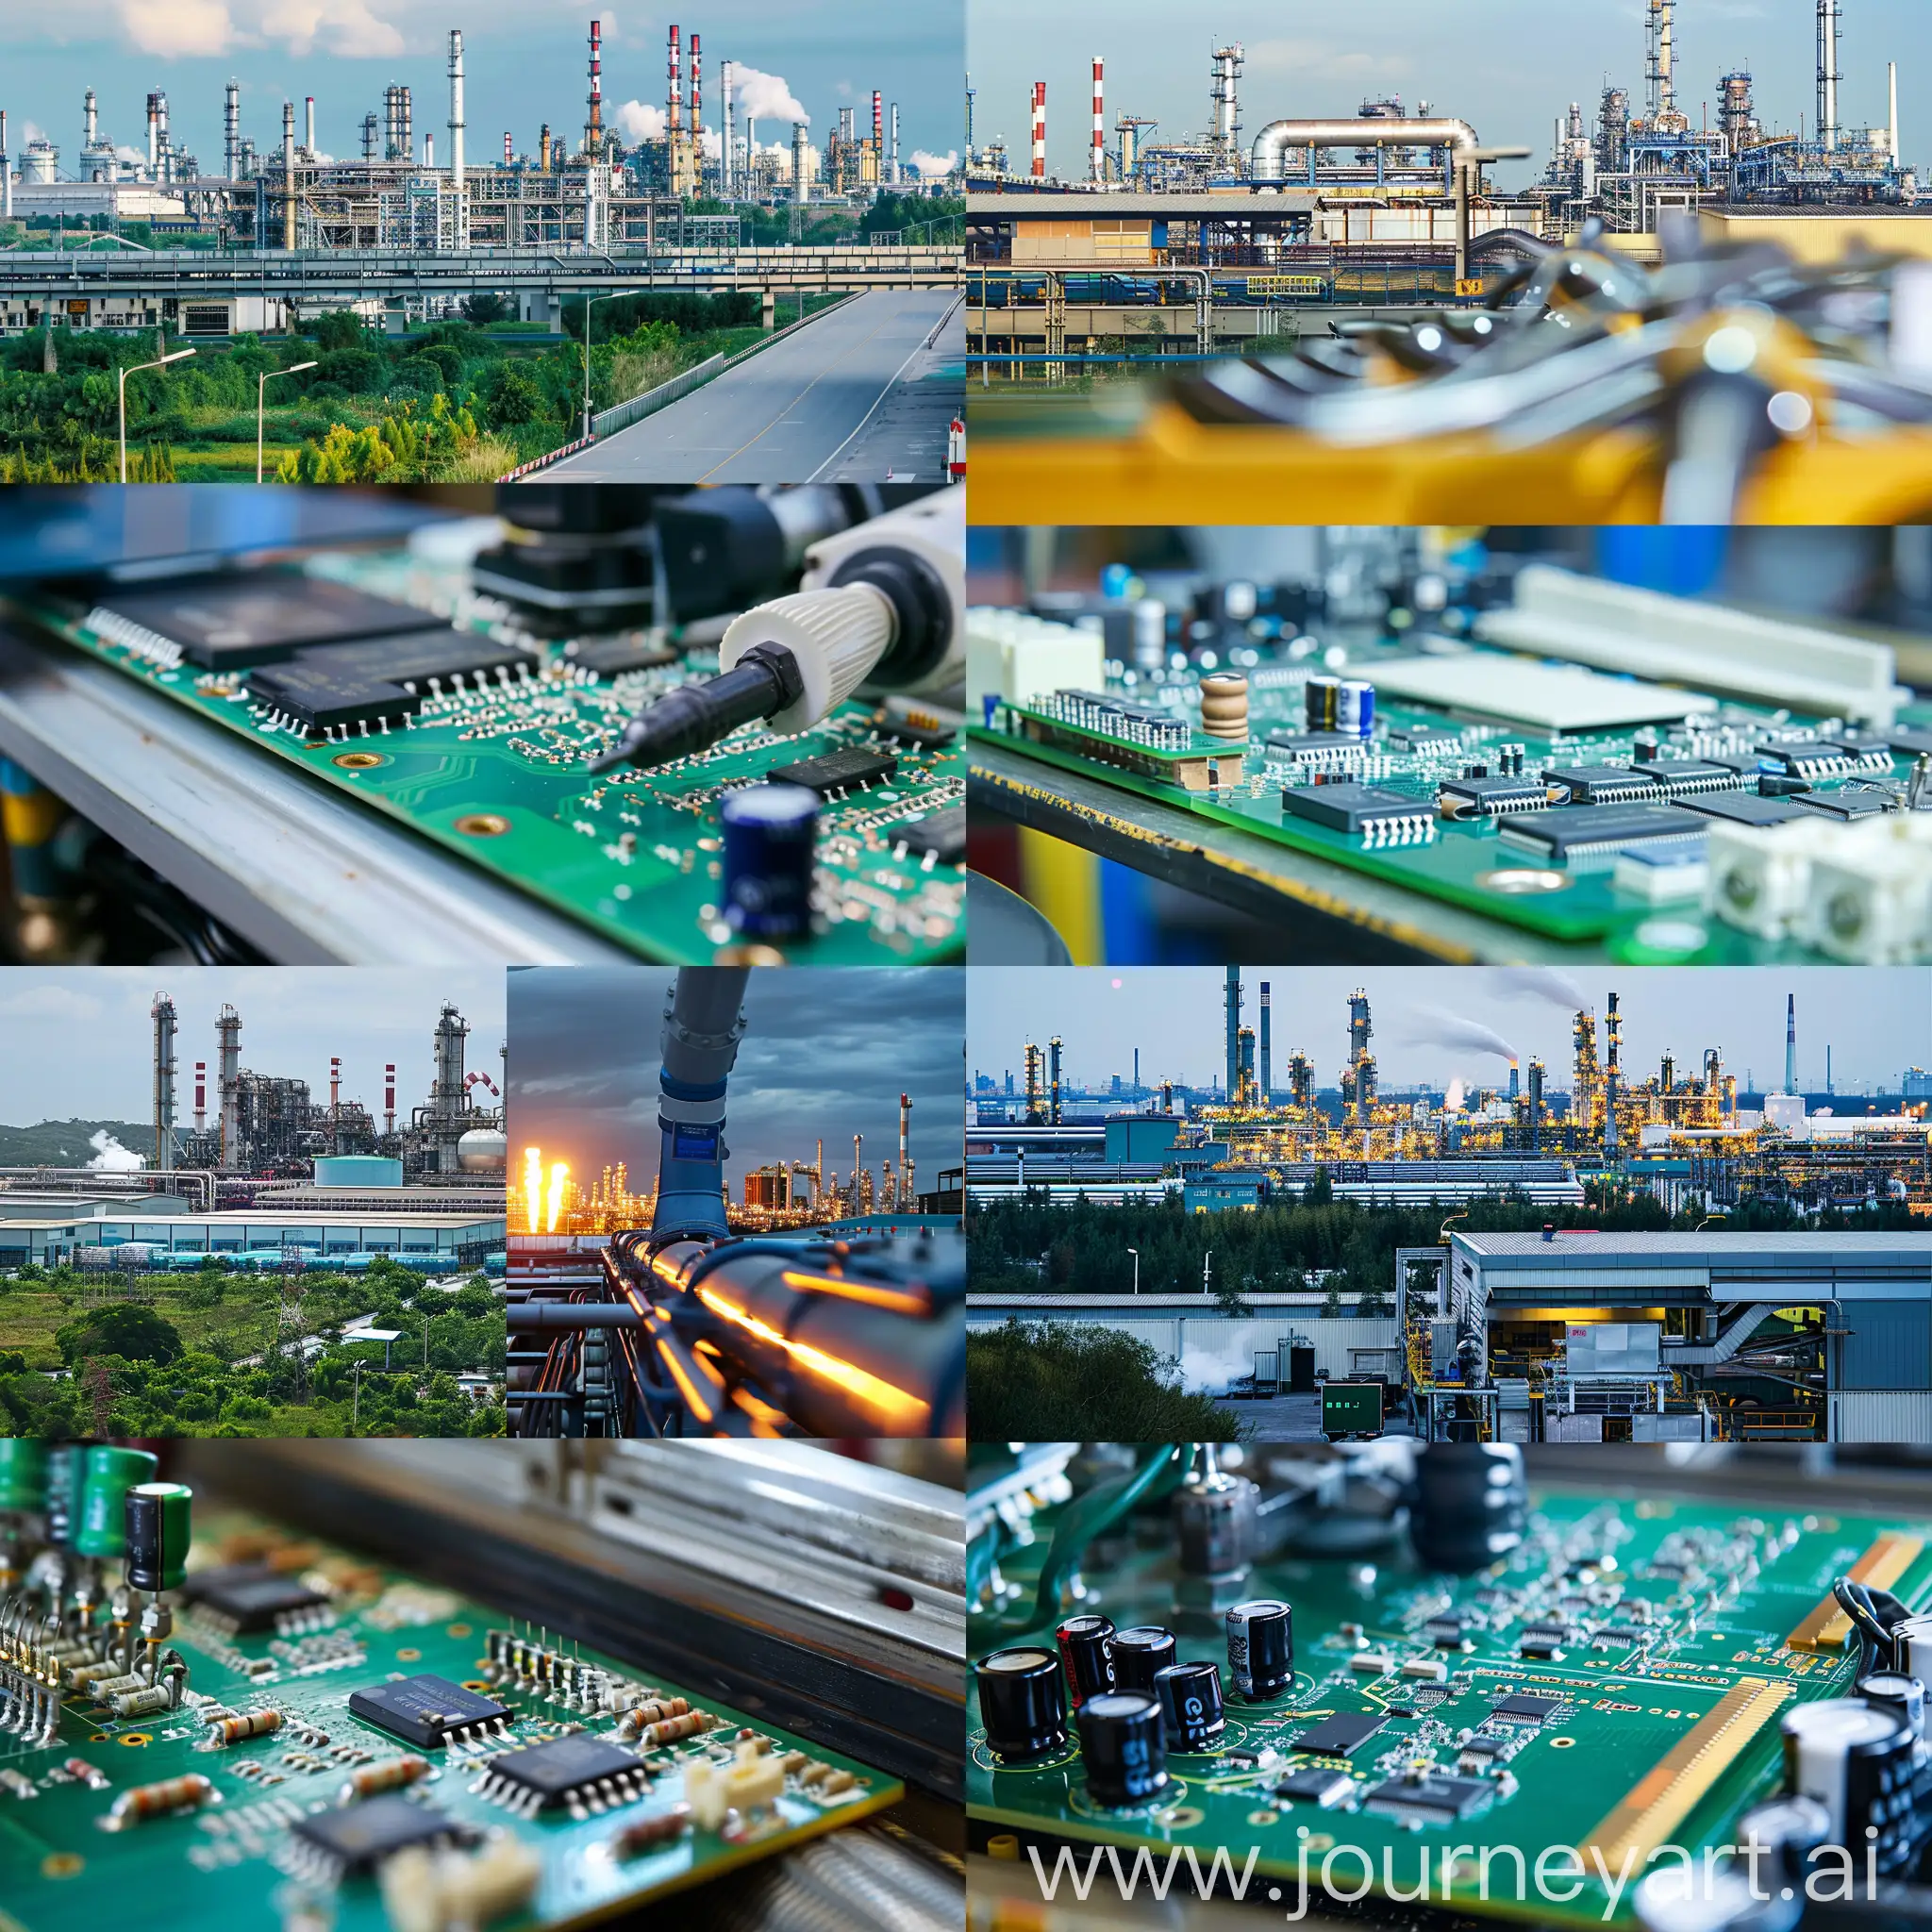 A photo of a gas detection production company in which there is an electronic board manufacturing workshop and a photo of a gas refinery in the background.